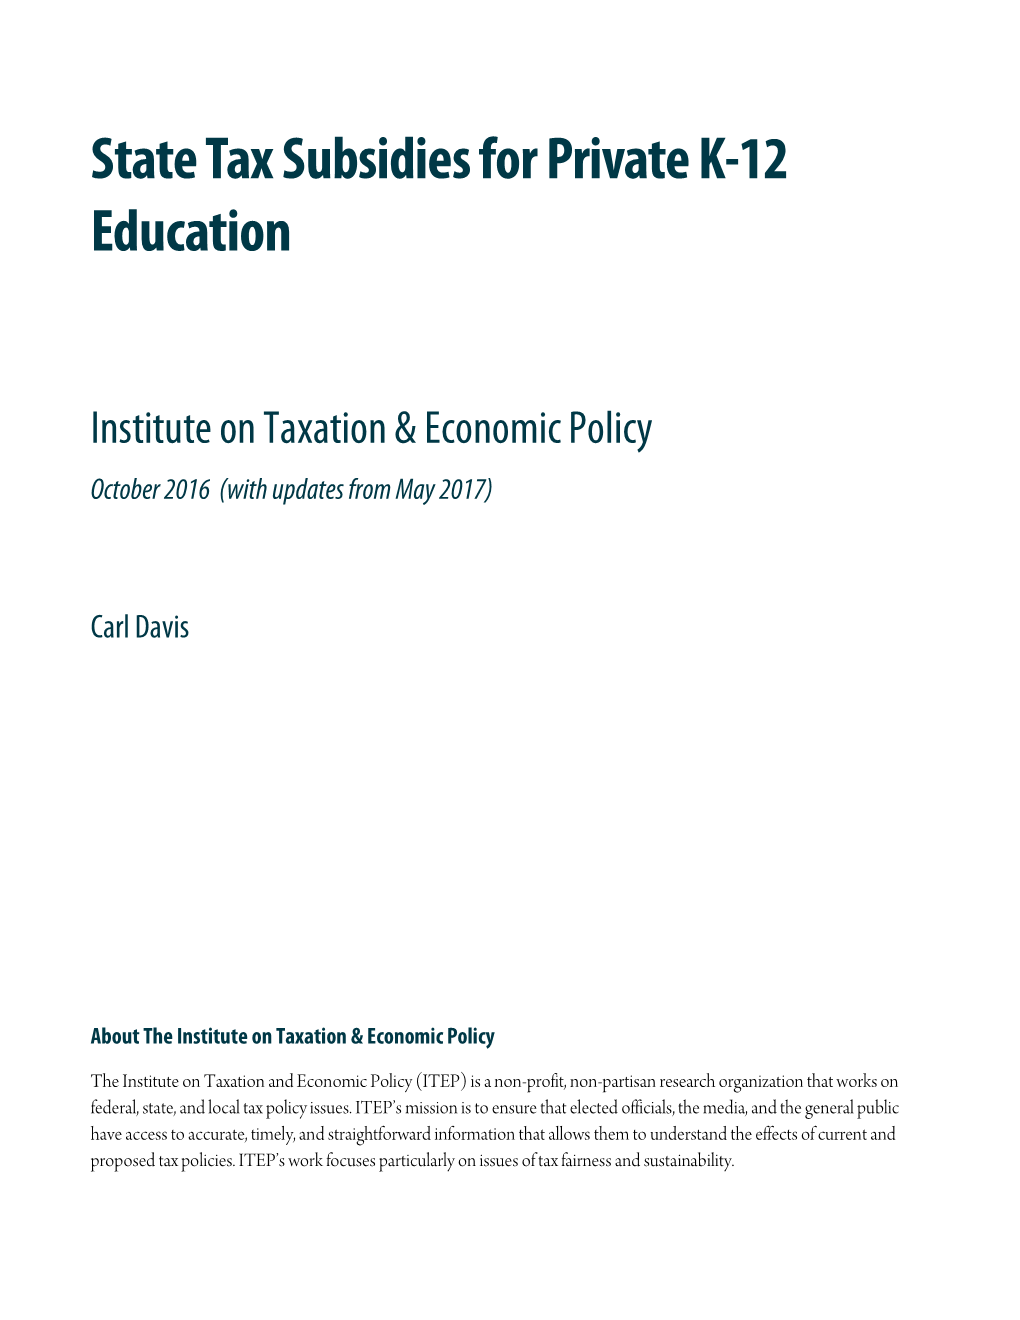 State Tax Subsidies for Private K-12 Education